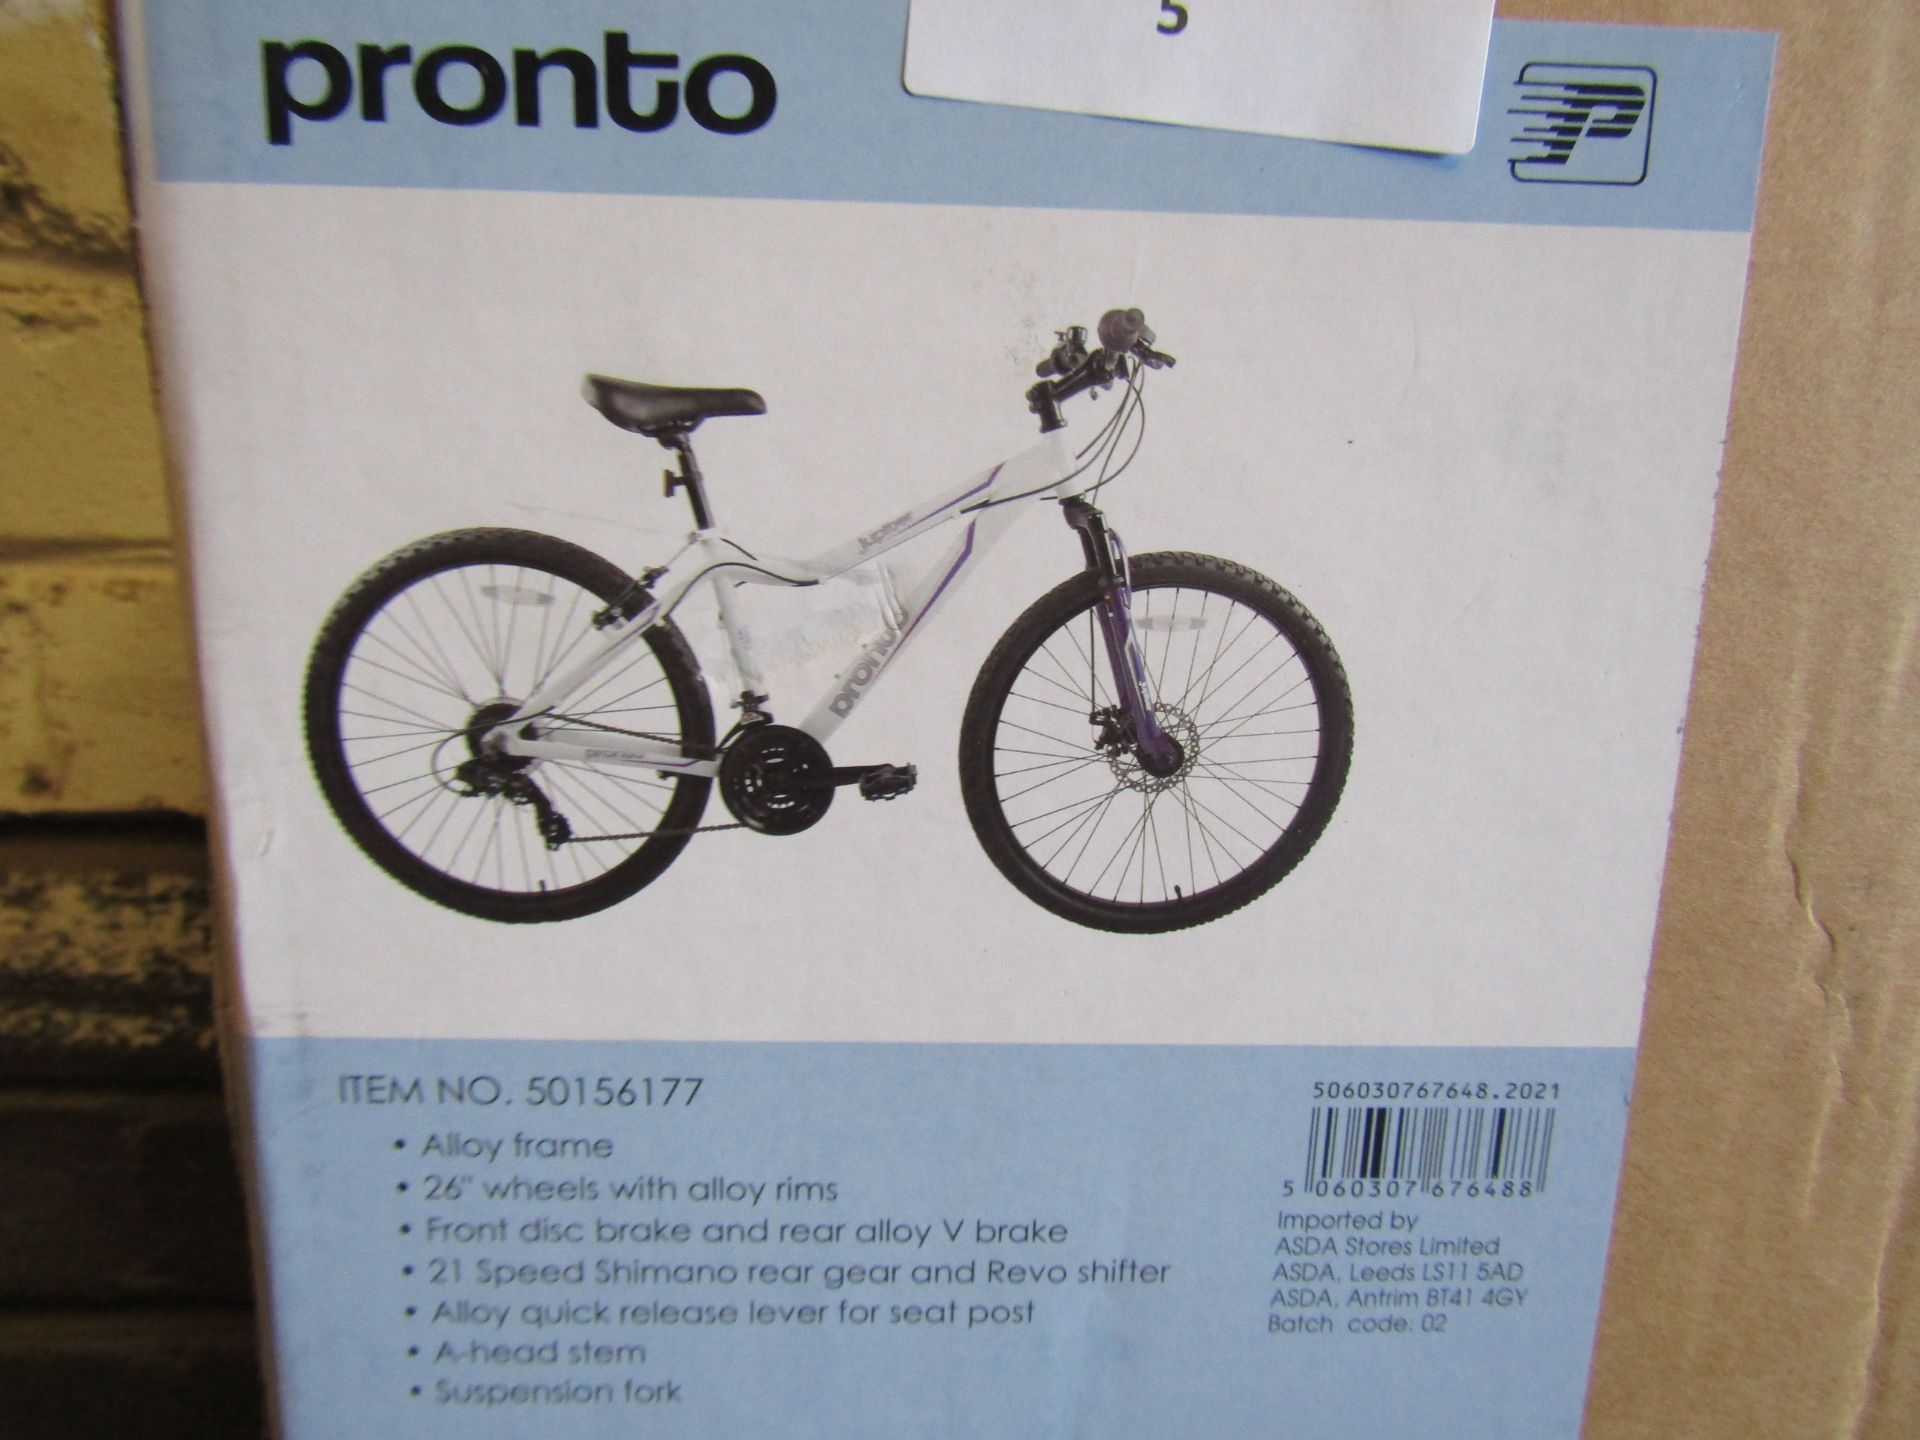 Pronto Jupitor ladies mountain bike Bike, used and unchecked, load ref ASD23004034